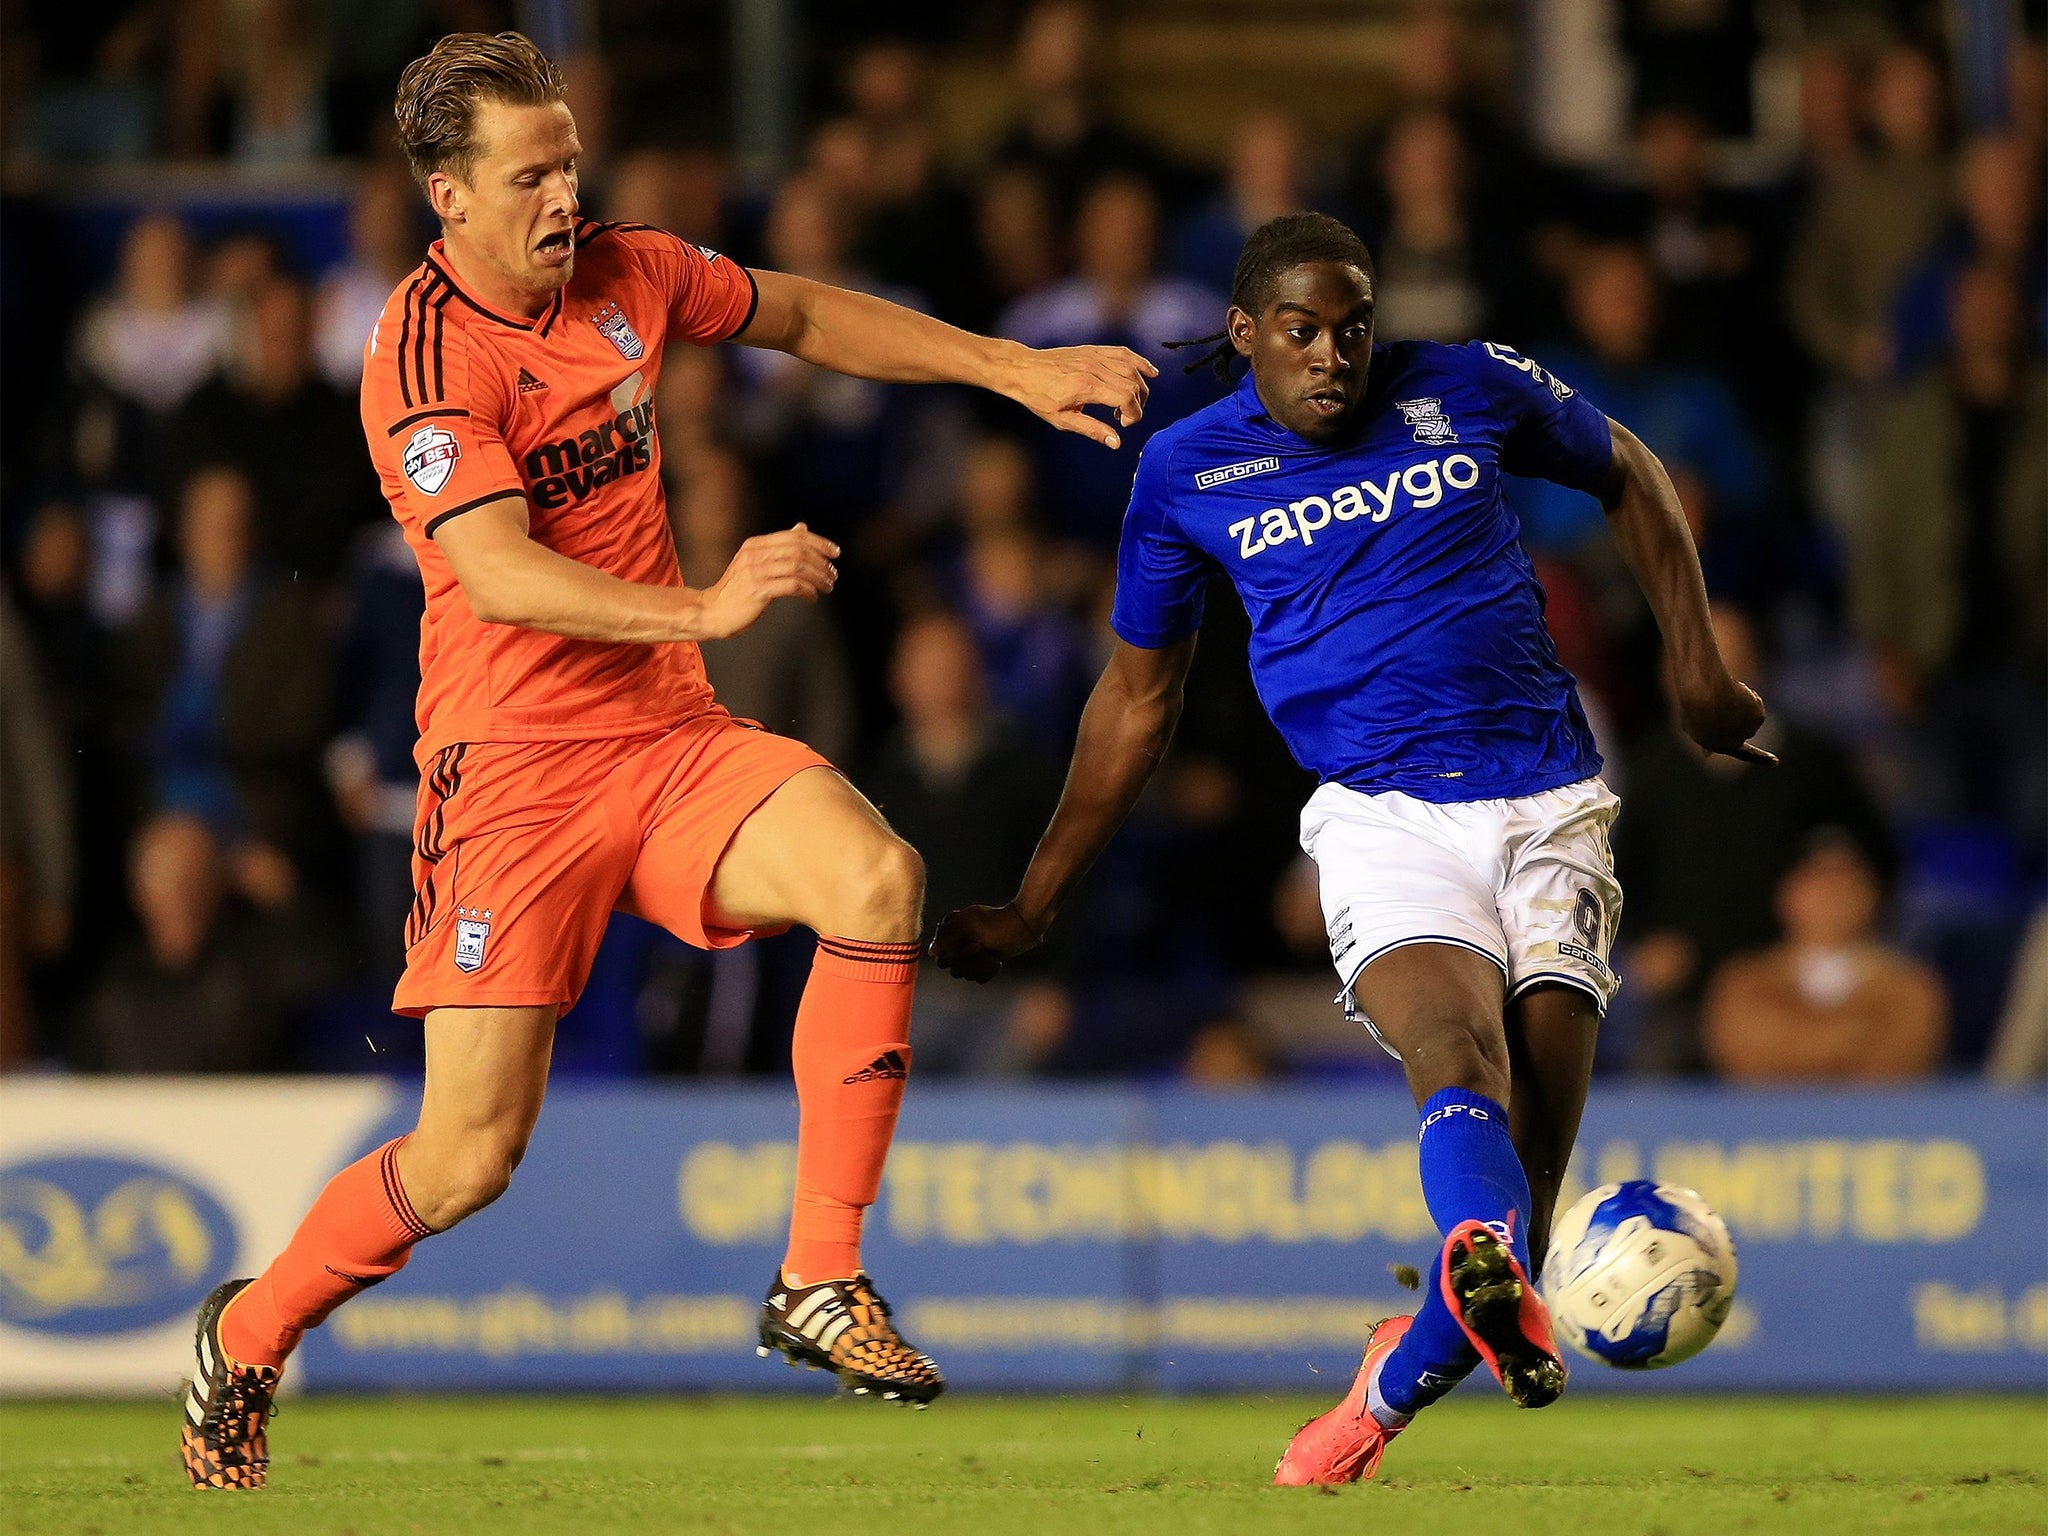 Clayton Donaldson hits the second goal for Birmingham on 63 minutes